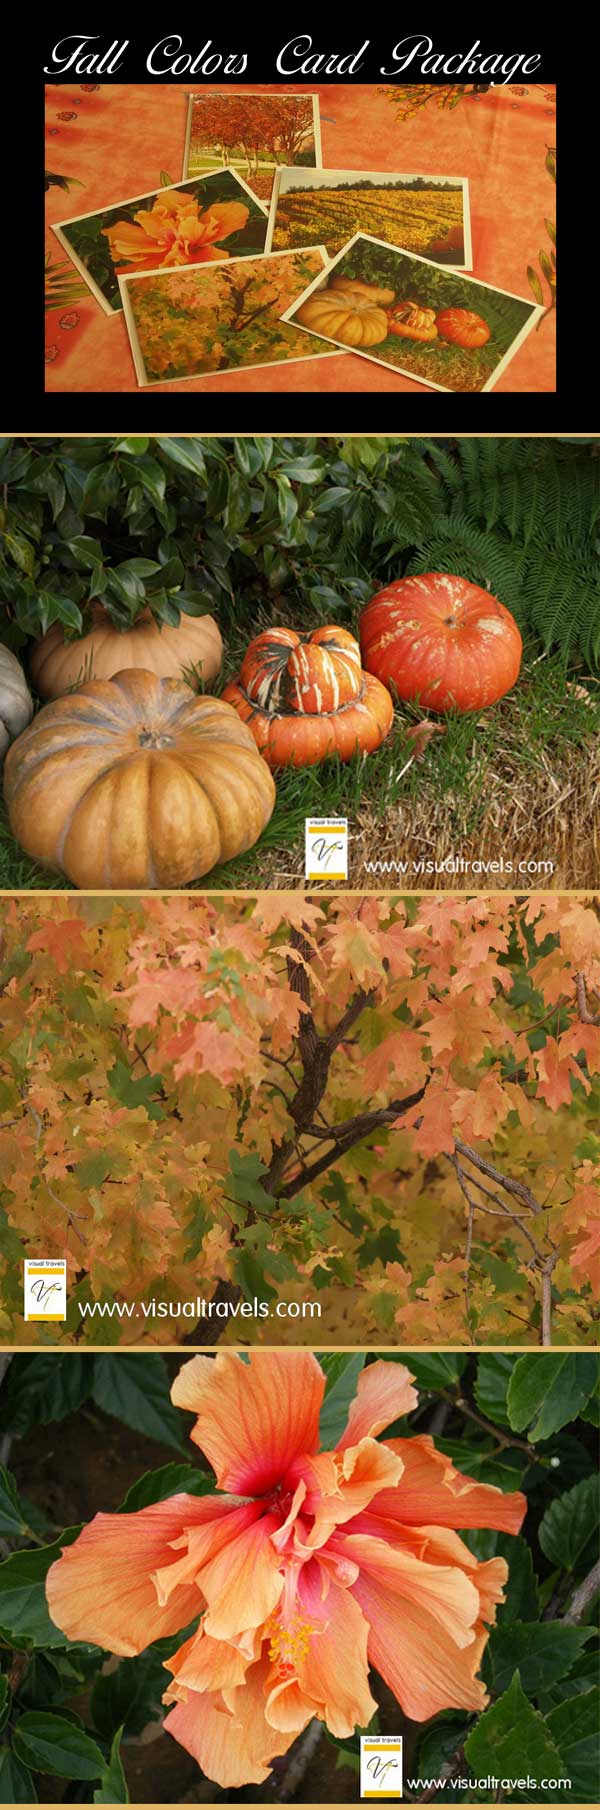 Image of Fall Colors Card Package showing all 5 cards, and pumpkin, hibiscus, fall colors on trees by Marsha J Black